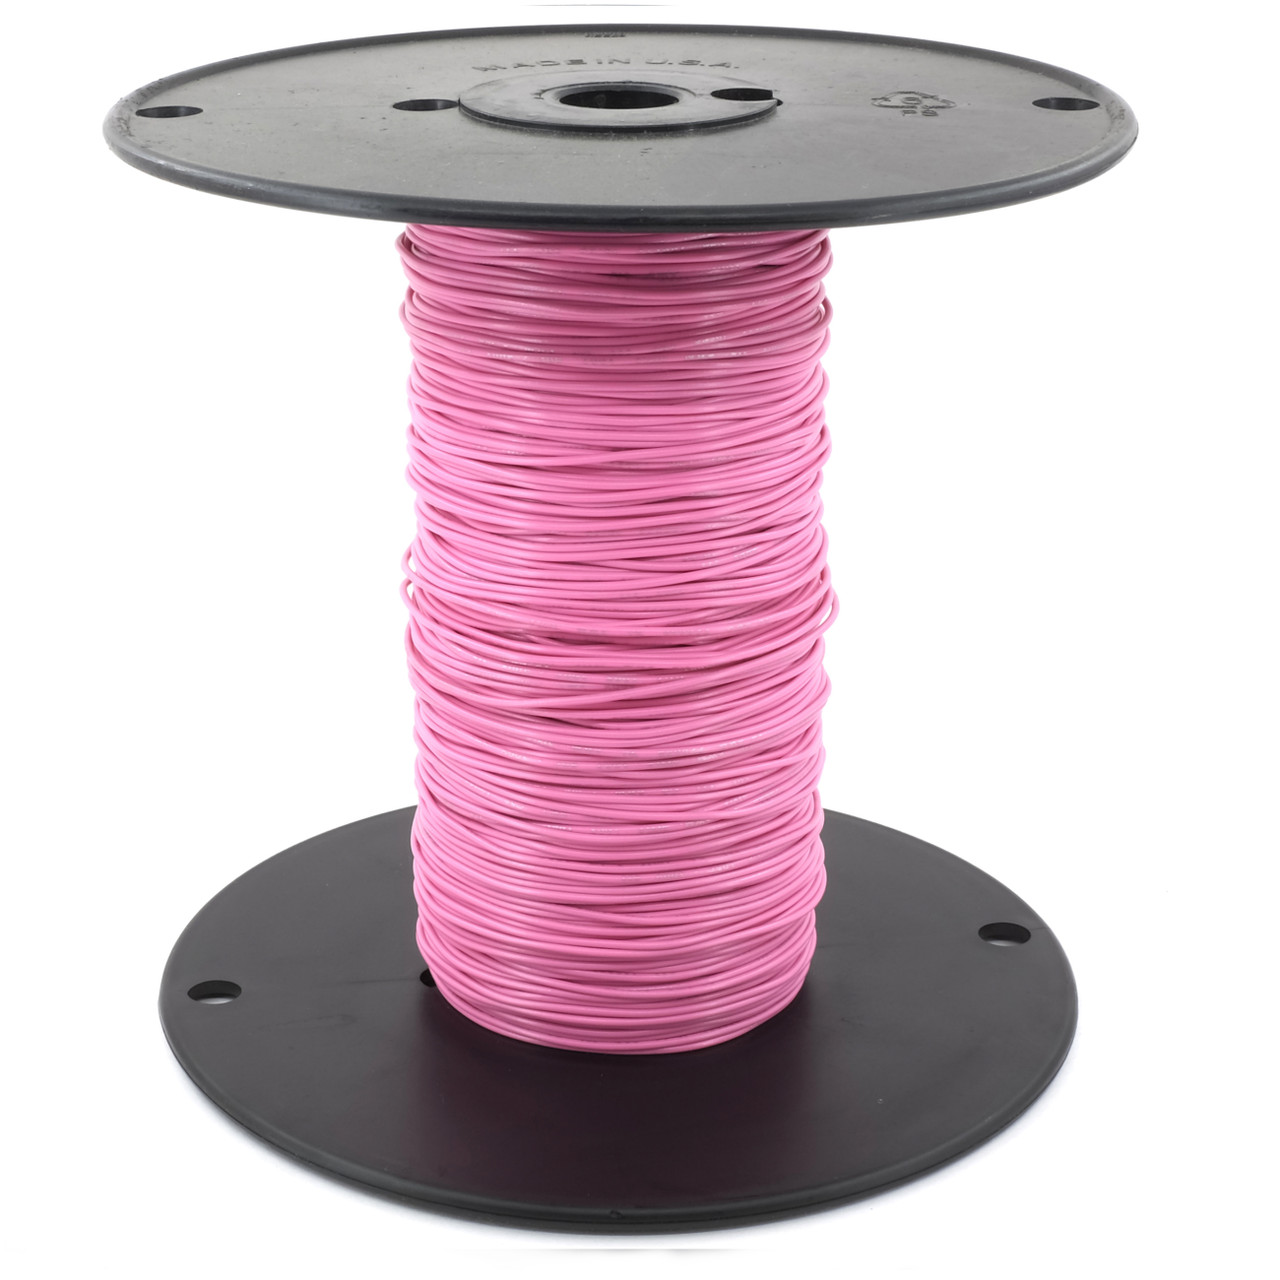 Hook-Up Wire - 24AWG Pre-Bond - 500 Foot Spool